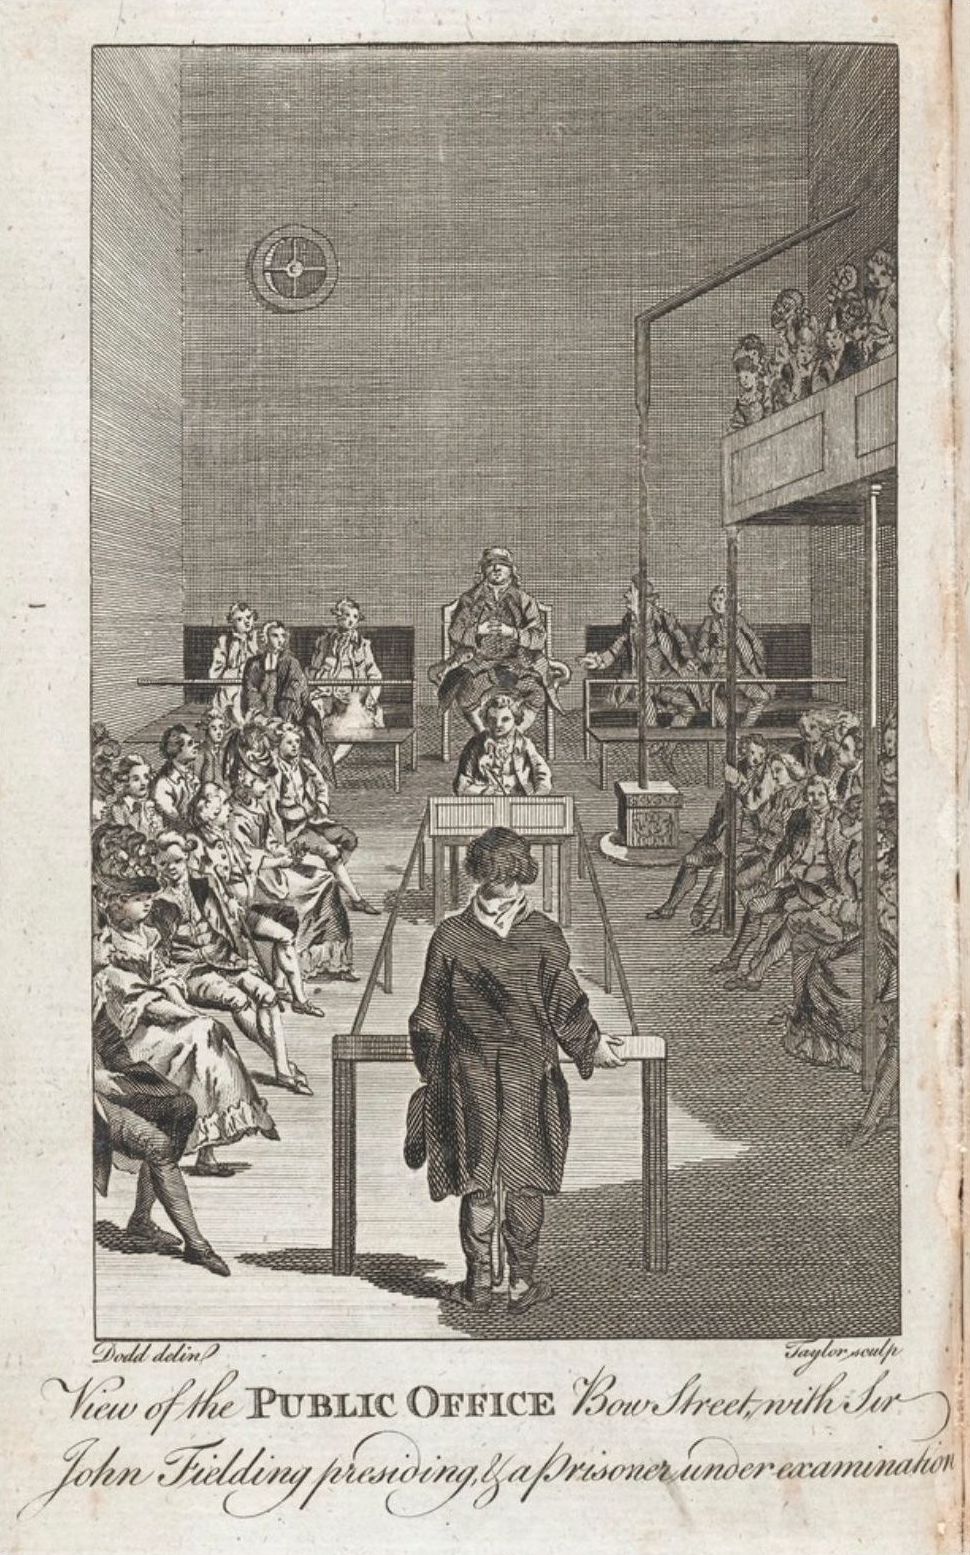 Figure 6.4: [The Public Office, Bow Street. The Malefactor's Register; or the Newgate and Tyburn Calendar (1779), vol. III, frontispiece](http://estc.bl.uk/F/?func=find-b&local_base=BLL06&request=T69563&find_code=ESTID). © Trustees of the British Library.